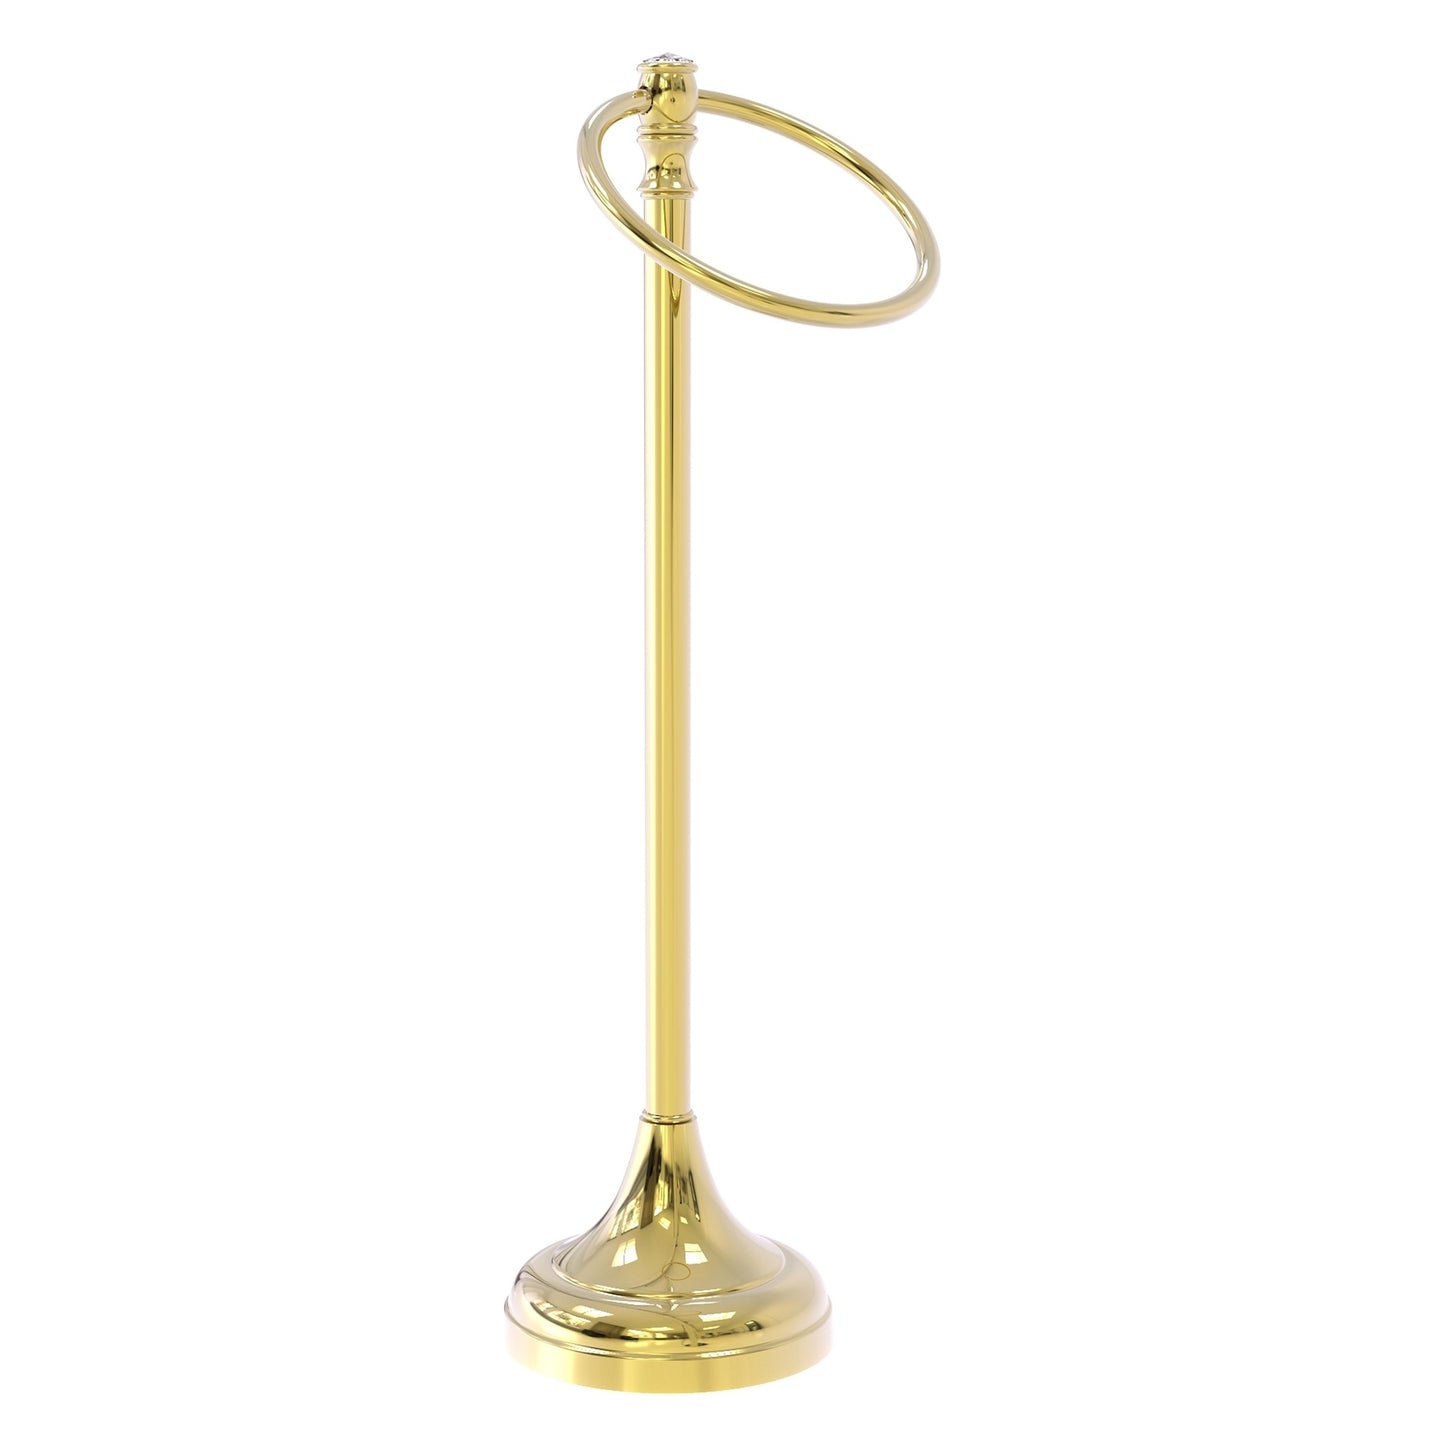 Allied Brass Carolina Crystal 5.5" x 7.5" Unlacquered Brass Solid Brass Guest Towel Ring Stand